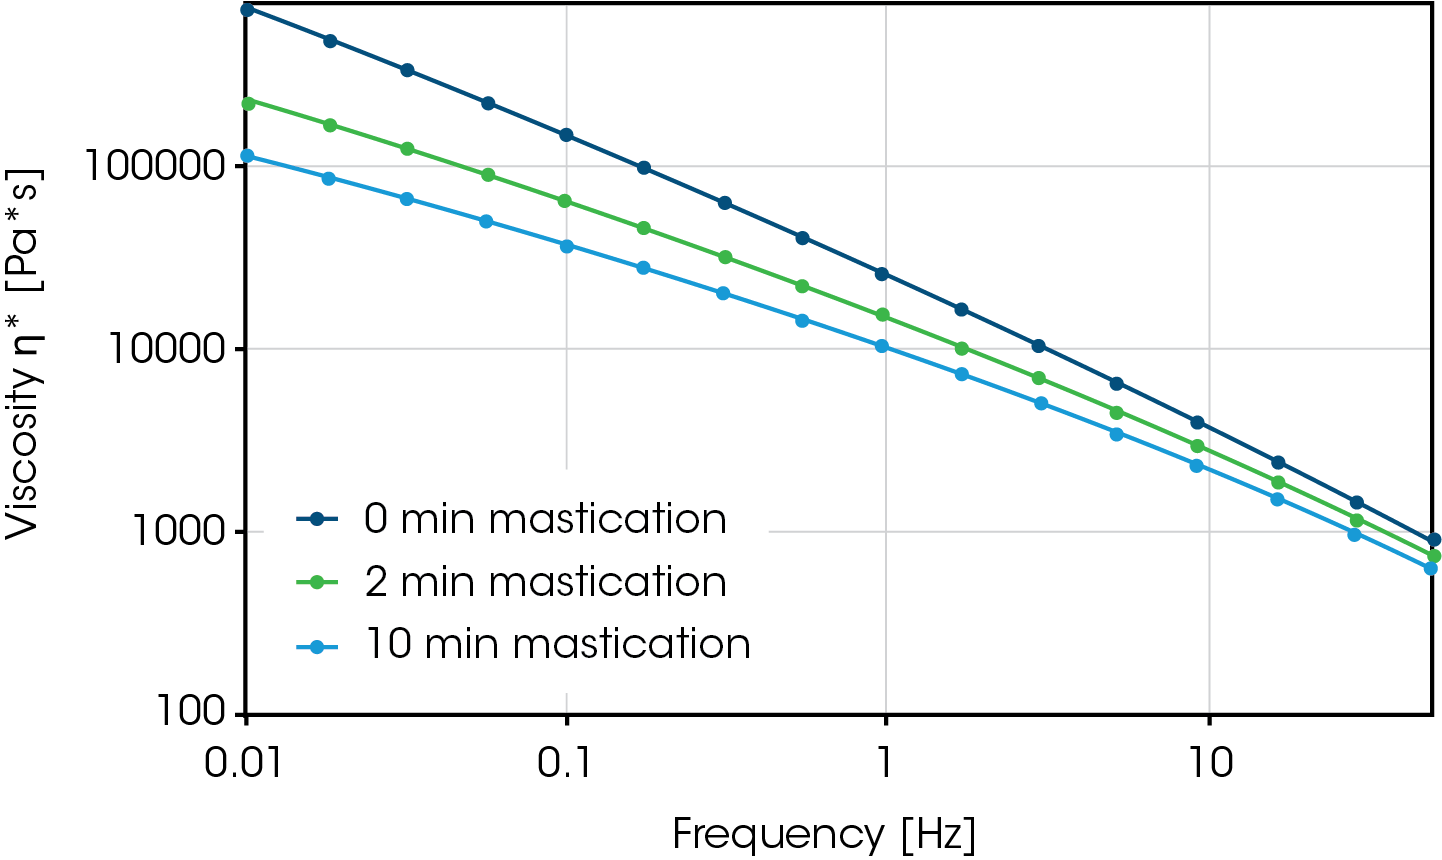 Figure 3. Frequency sweep depicting the complex viscosity, η*, for natural rubber at mastication times of 0, 2, and 10 minutes performed at 130 °C.